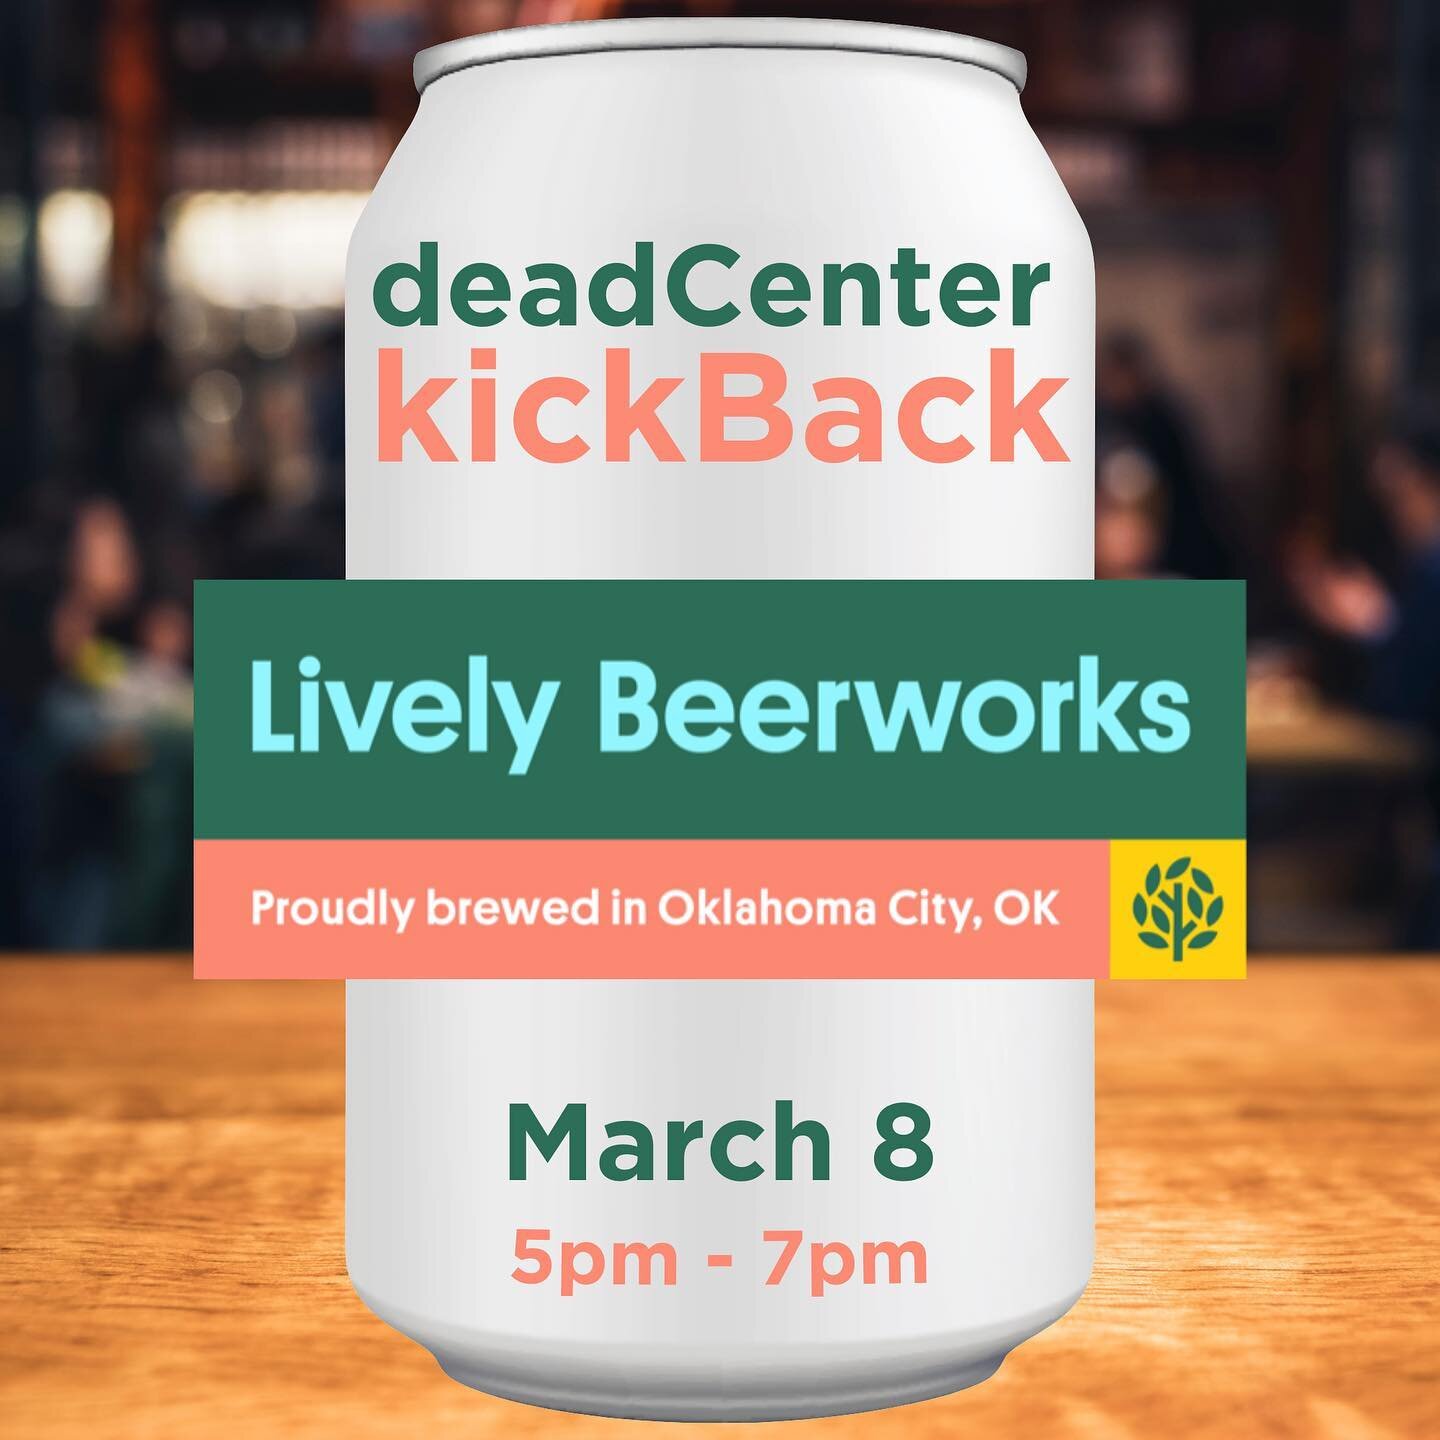 #ICYMI &mdash; Be there for the return of deadCenter kickBacks, presented in partnership with @livelybeerworks. Join us THIS WEDNESDAY (3/08) for an evening of unforgettable discussion with industry professionals and enthusiasts &mdash; plus a free b